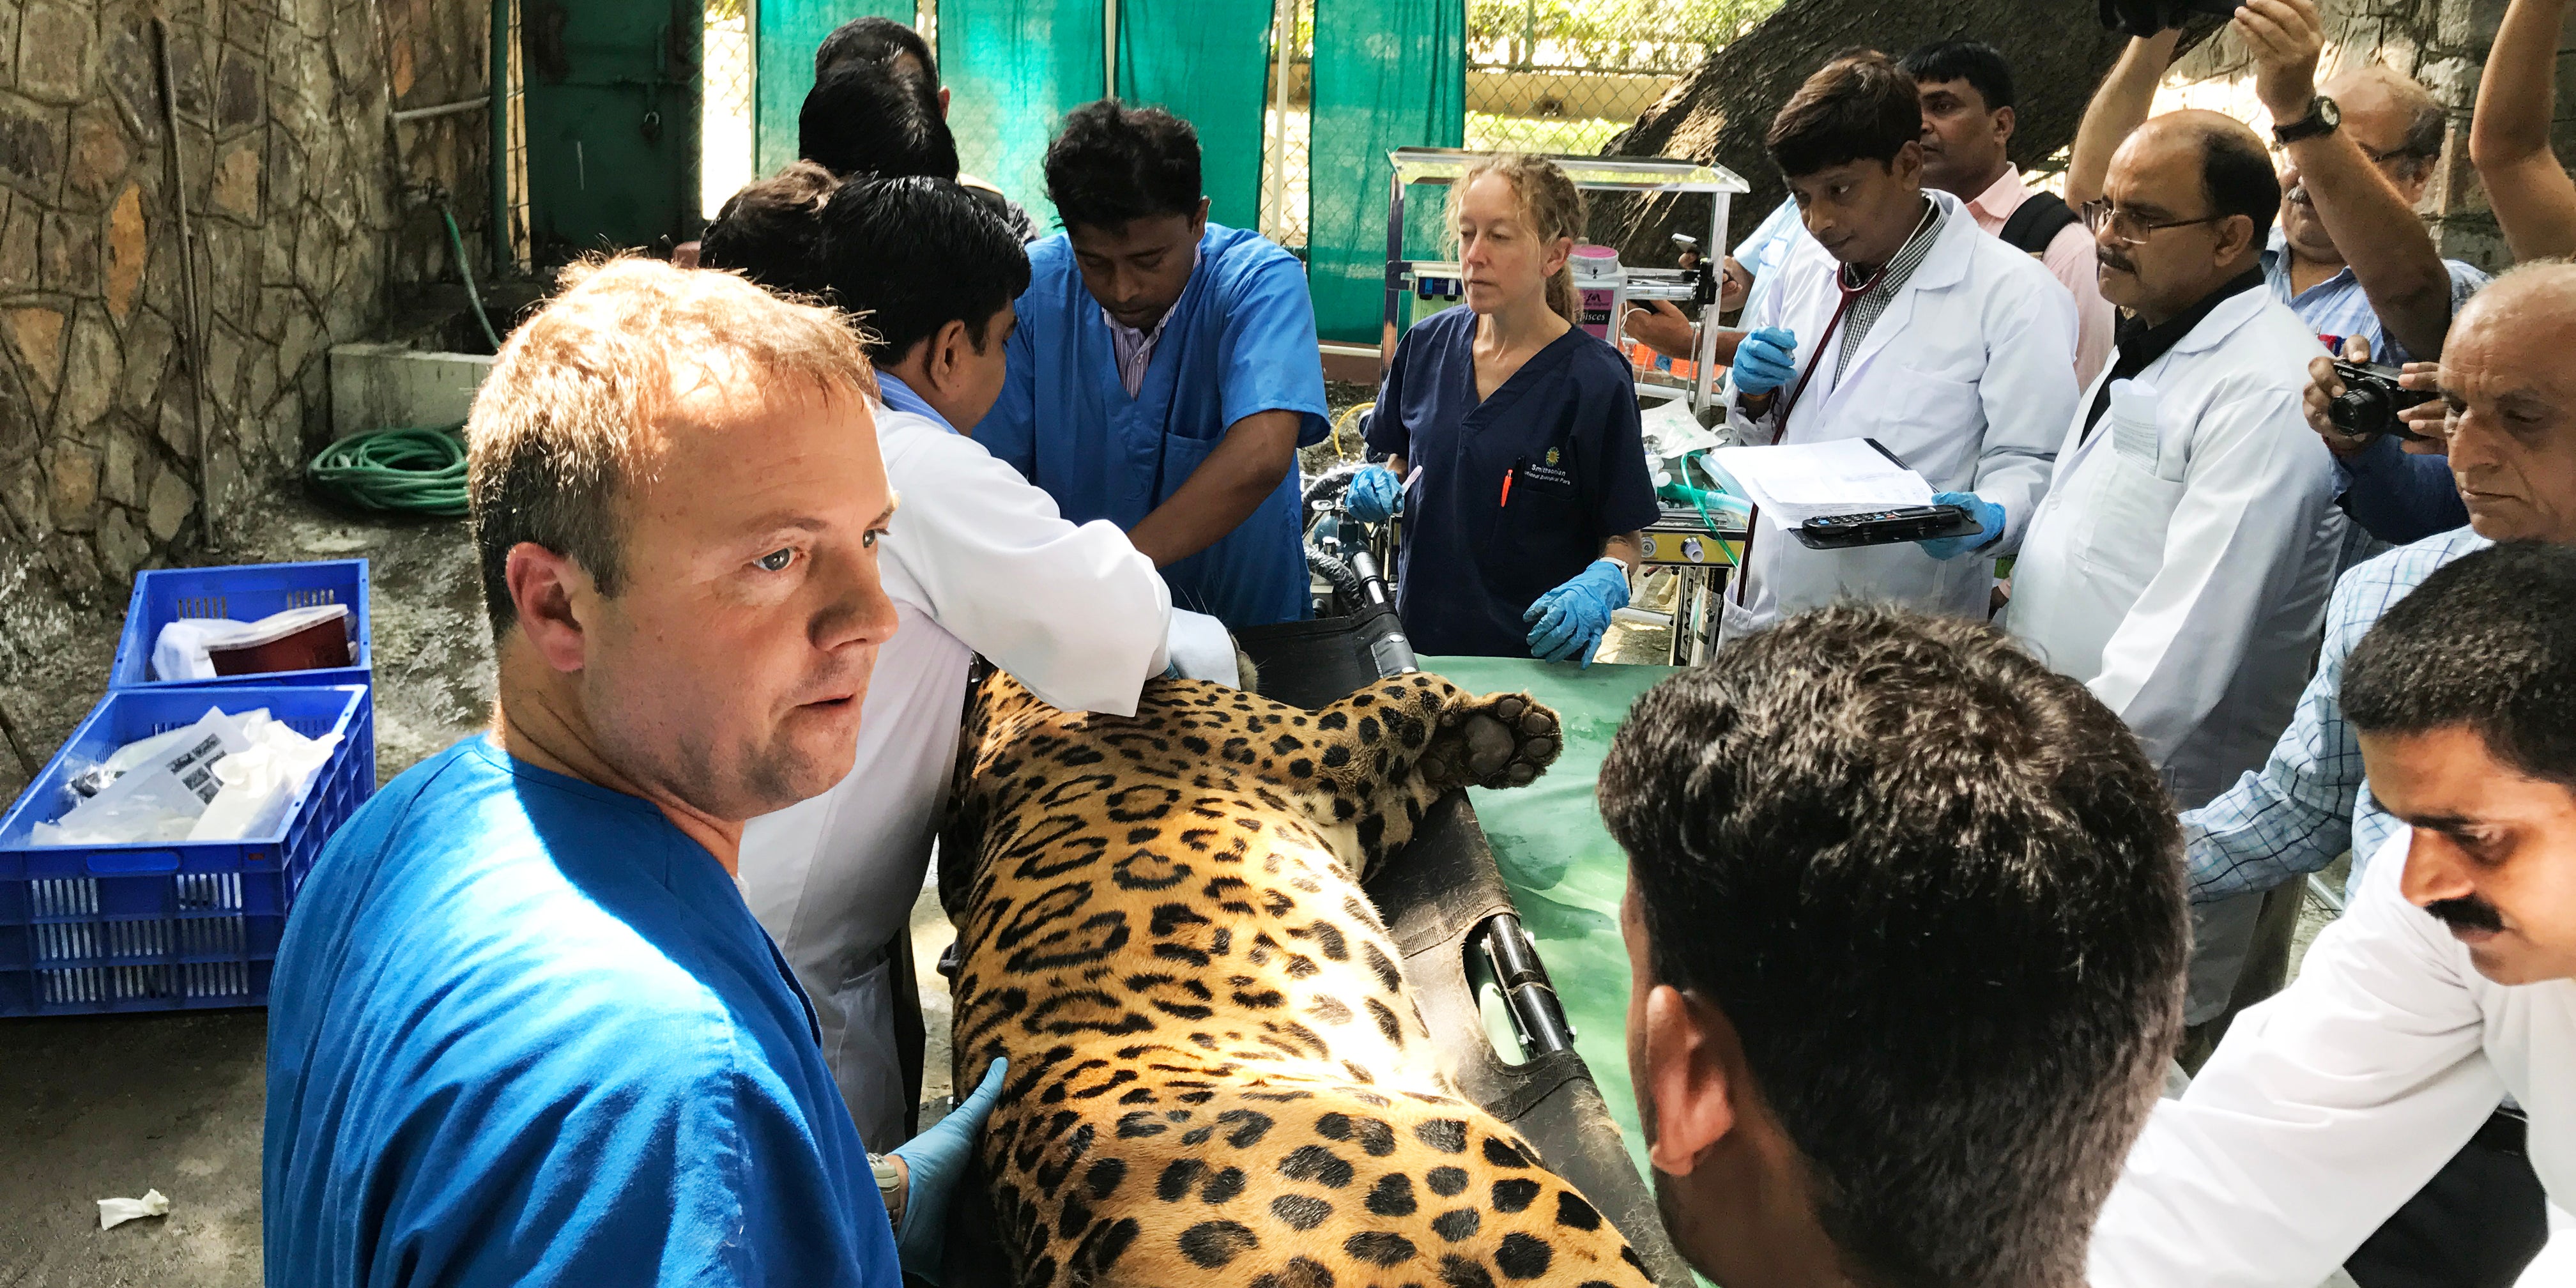 A group of scientists in India examining a large cat